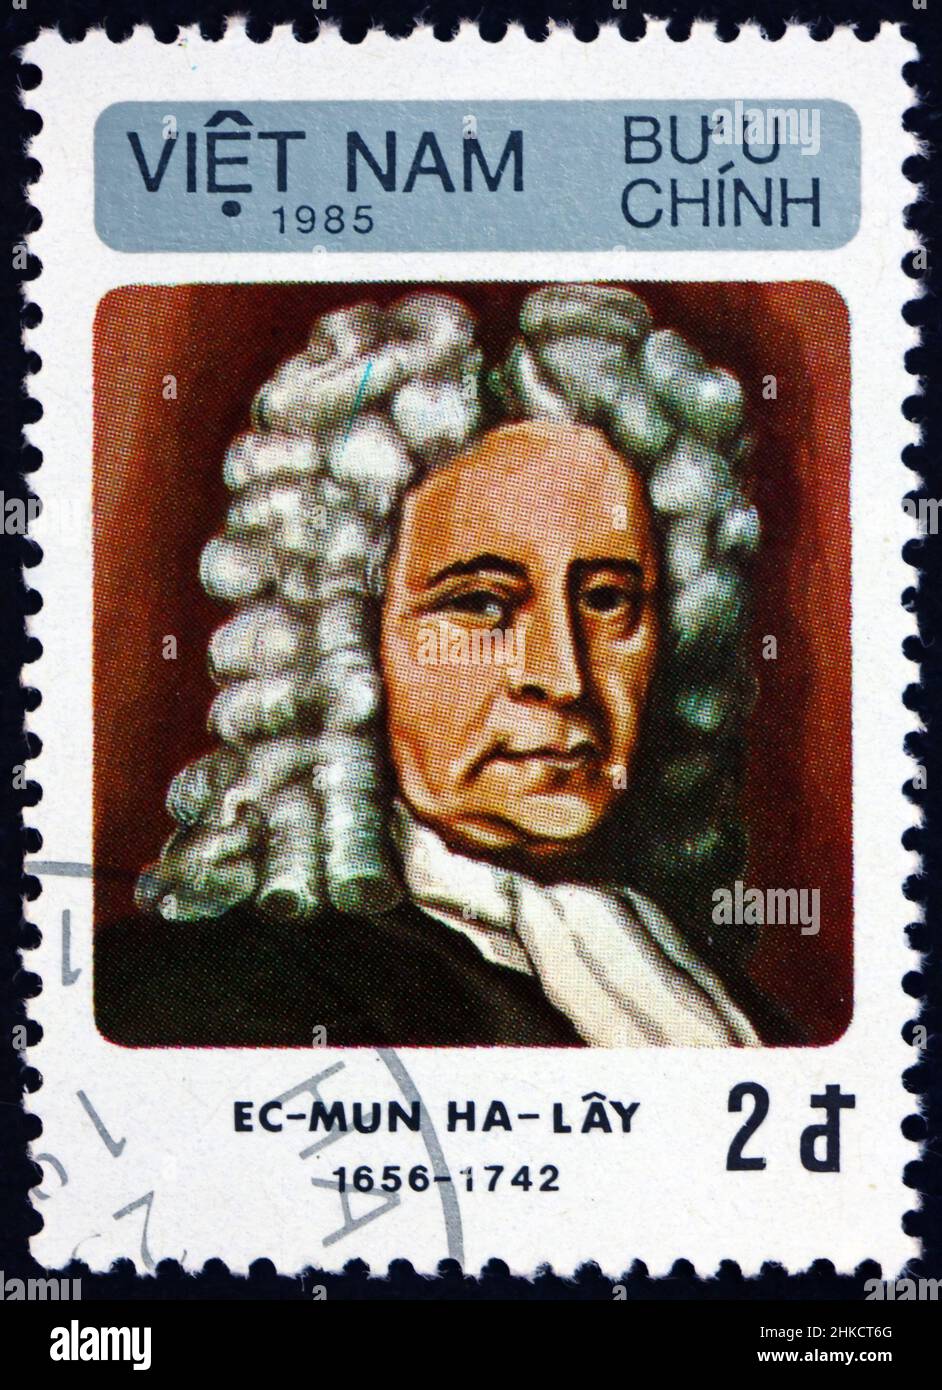 VIETNAM - CIRCA 1986: a stamp printed in Vietnam shows Edmond Halley, was an English astronomer, geophysicist and mathematician, circa 1986 Stock Photo